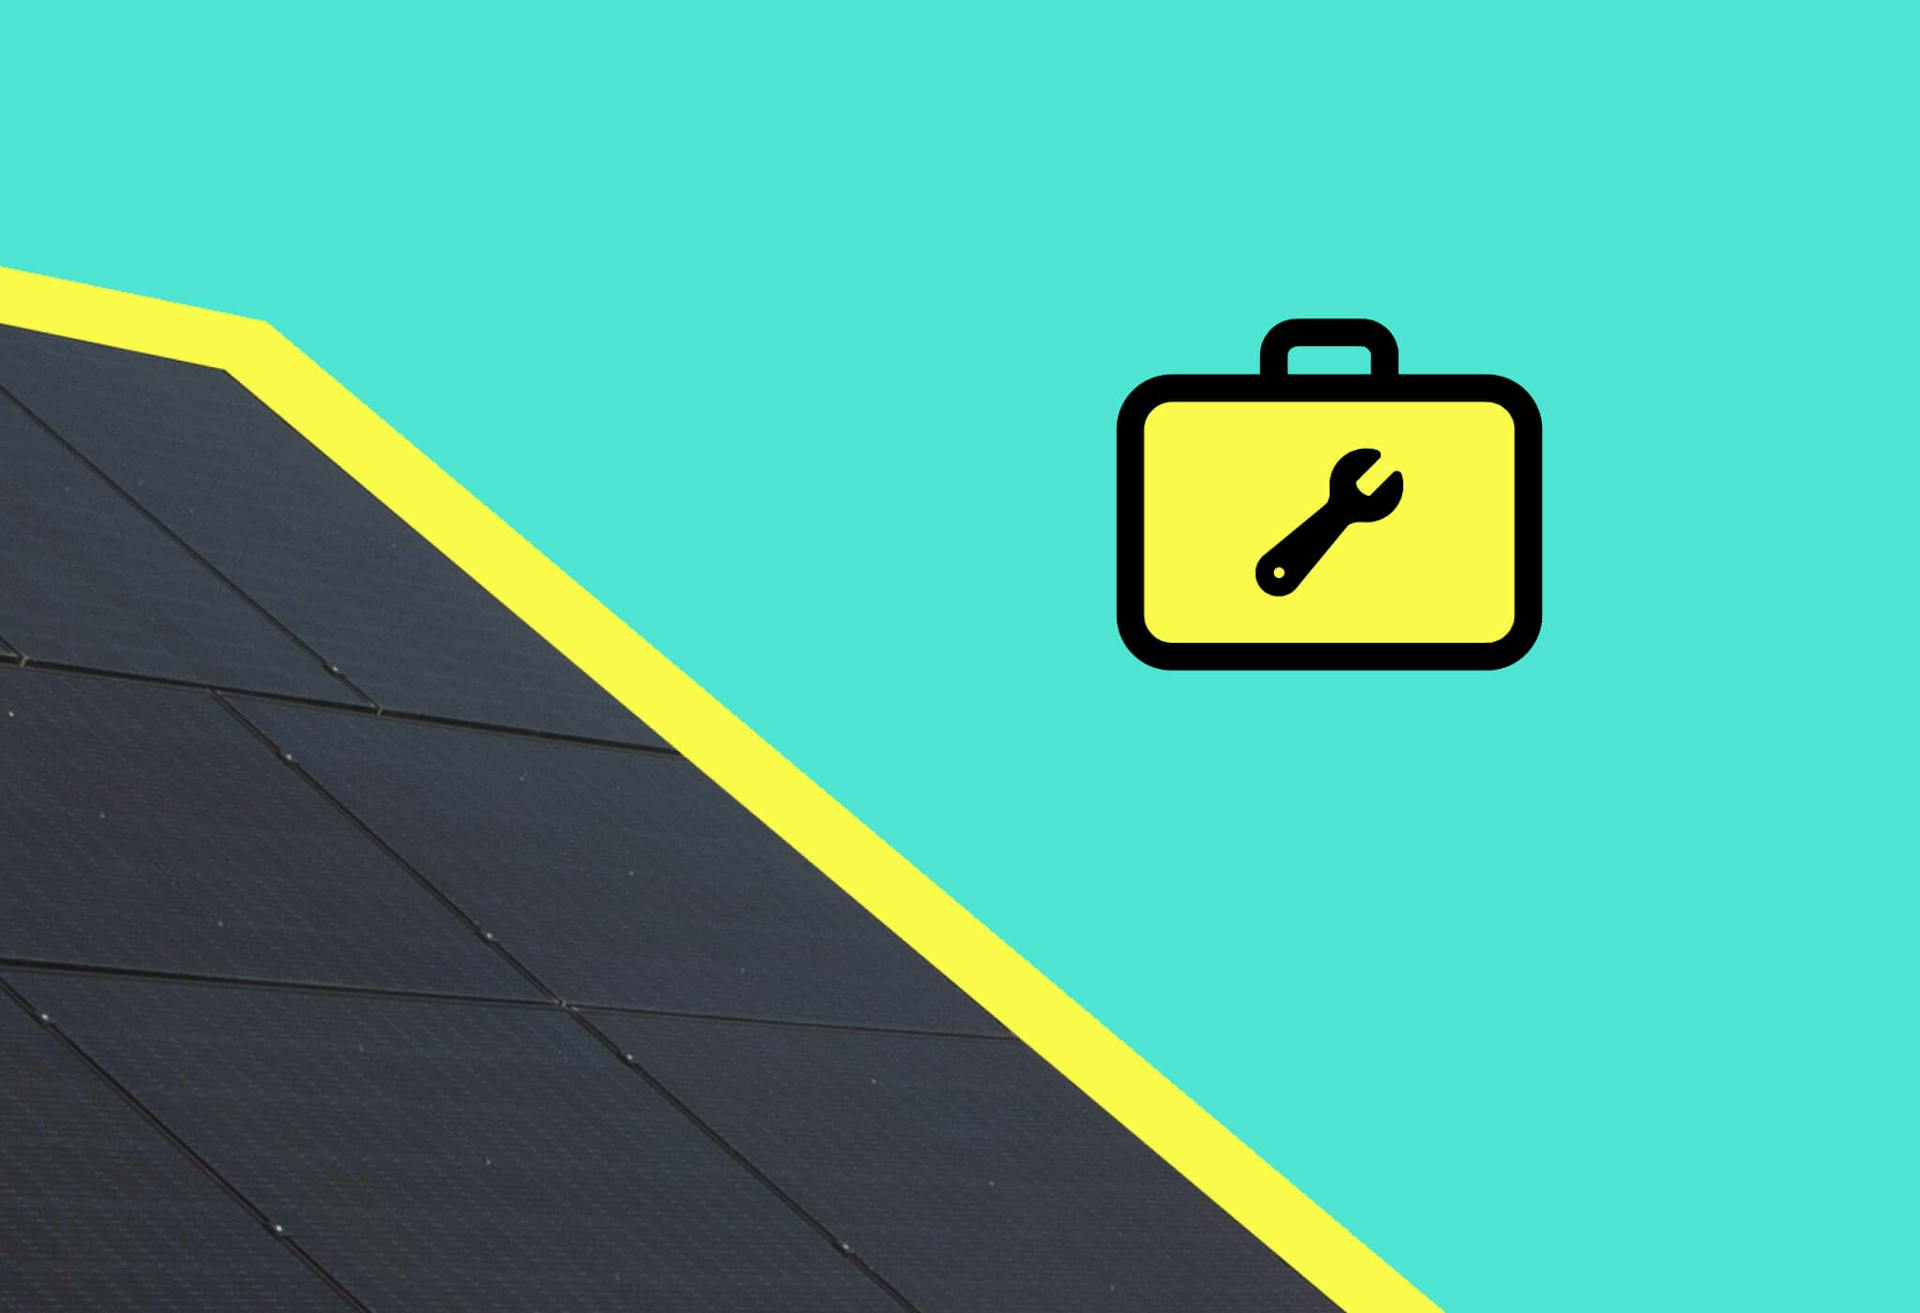 A black monocrystalline solar panel, turquoise background, and a cartoon yellow tool box with a spanner symbol on it